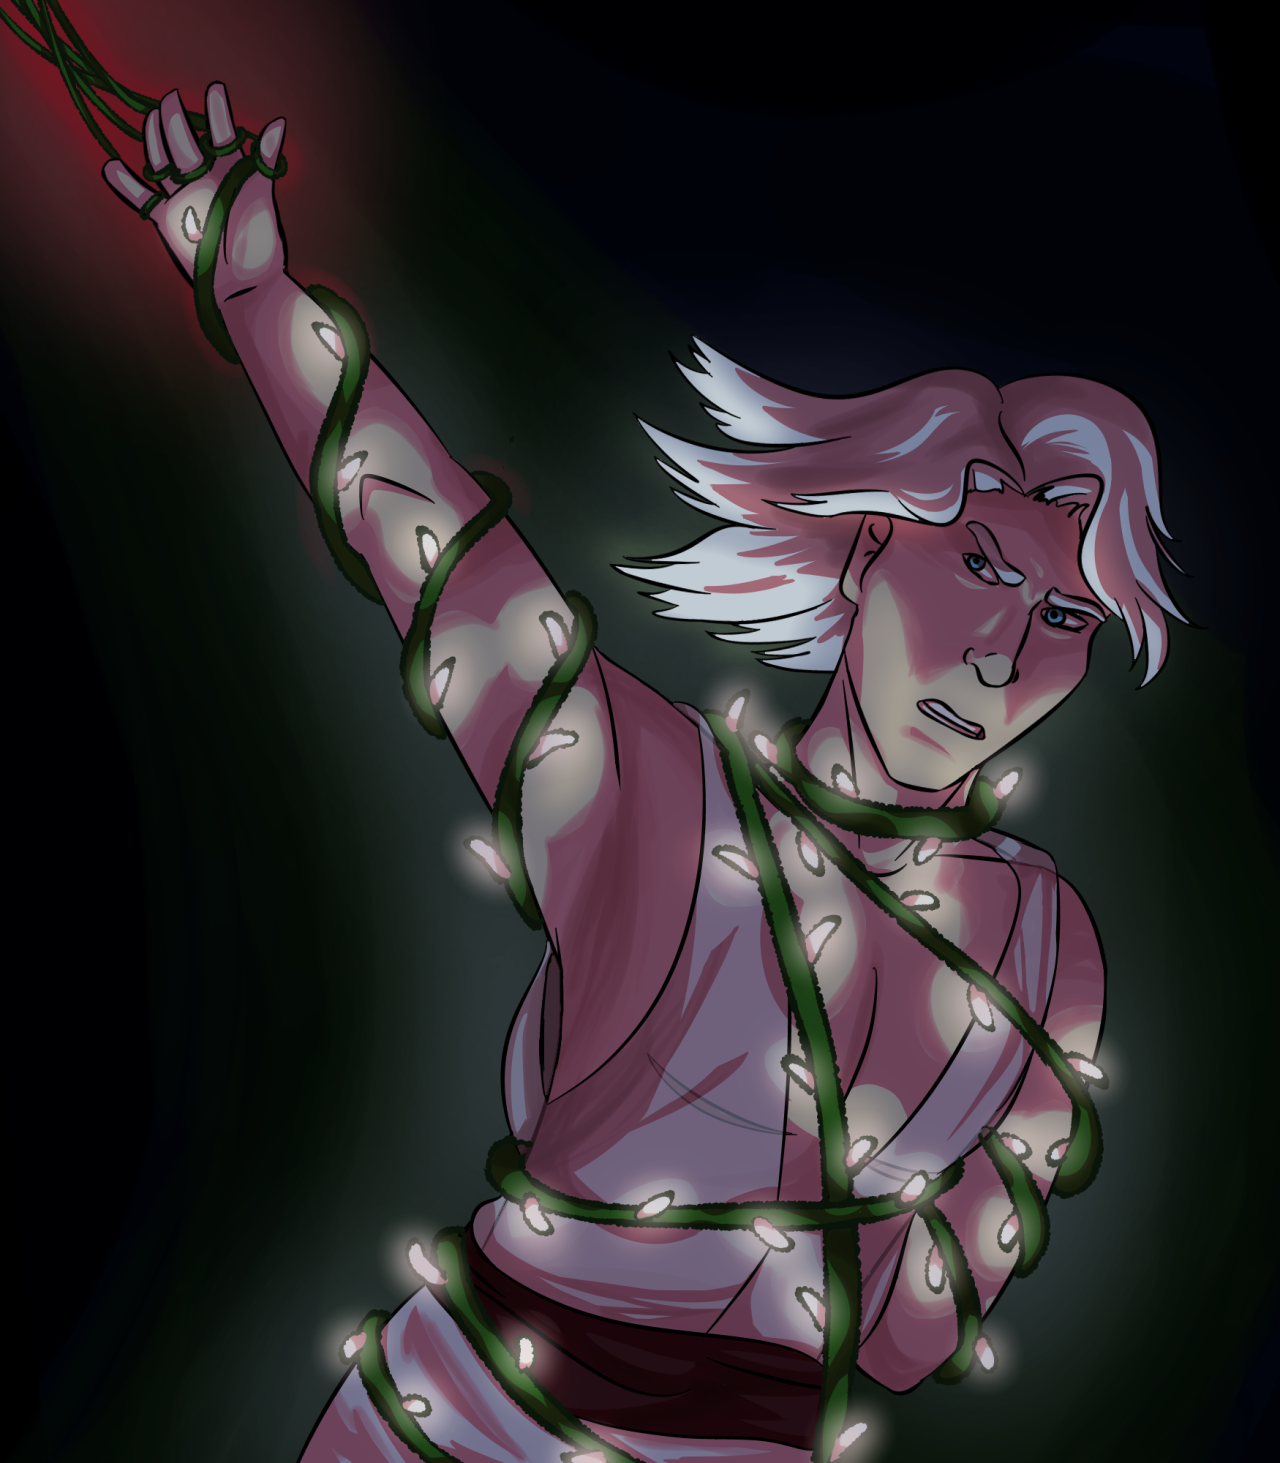 puppetmaster doesn’t seem too keen on letting you go, changeling[id: a digital drawing of Travis from Skyjacks. Travis is a white man with shoulder length white hair and top surgery scars, wearing a sheer shift with a maroon sash at his waist. He is grimacing, with one arm tied back behind his back and one arm pulled up behind him. He is tied in vines with glowing silver leaves, which are the only light source /end id] #skyjacks#campaign skyjacks#travis matagot#ash draws #what am i if not a pile of multiply layers